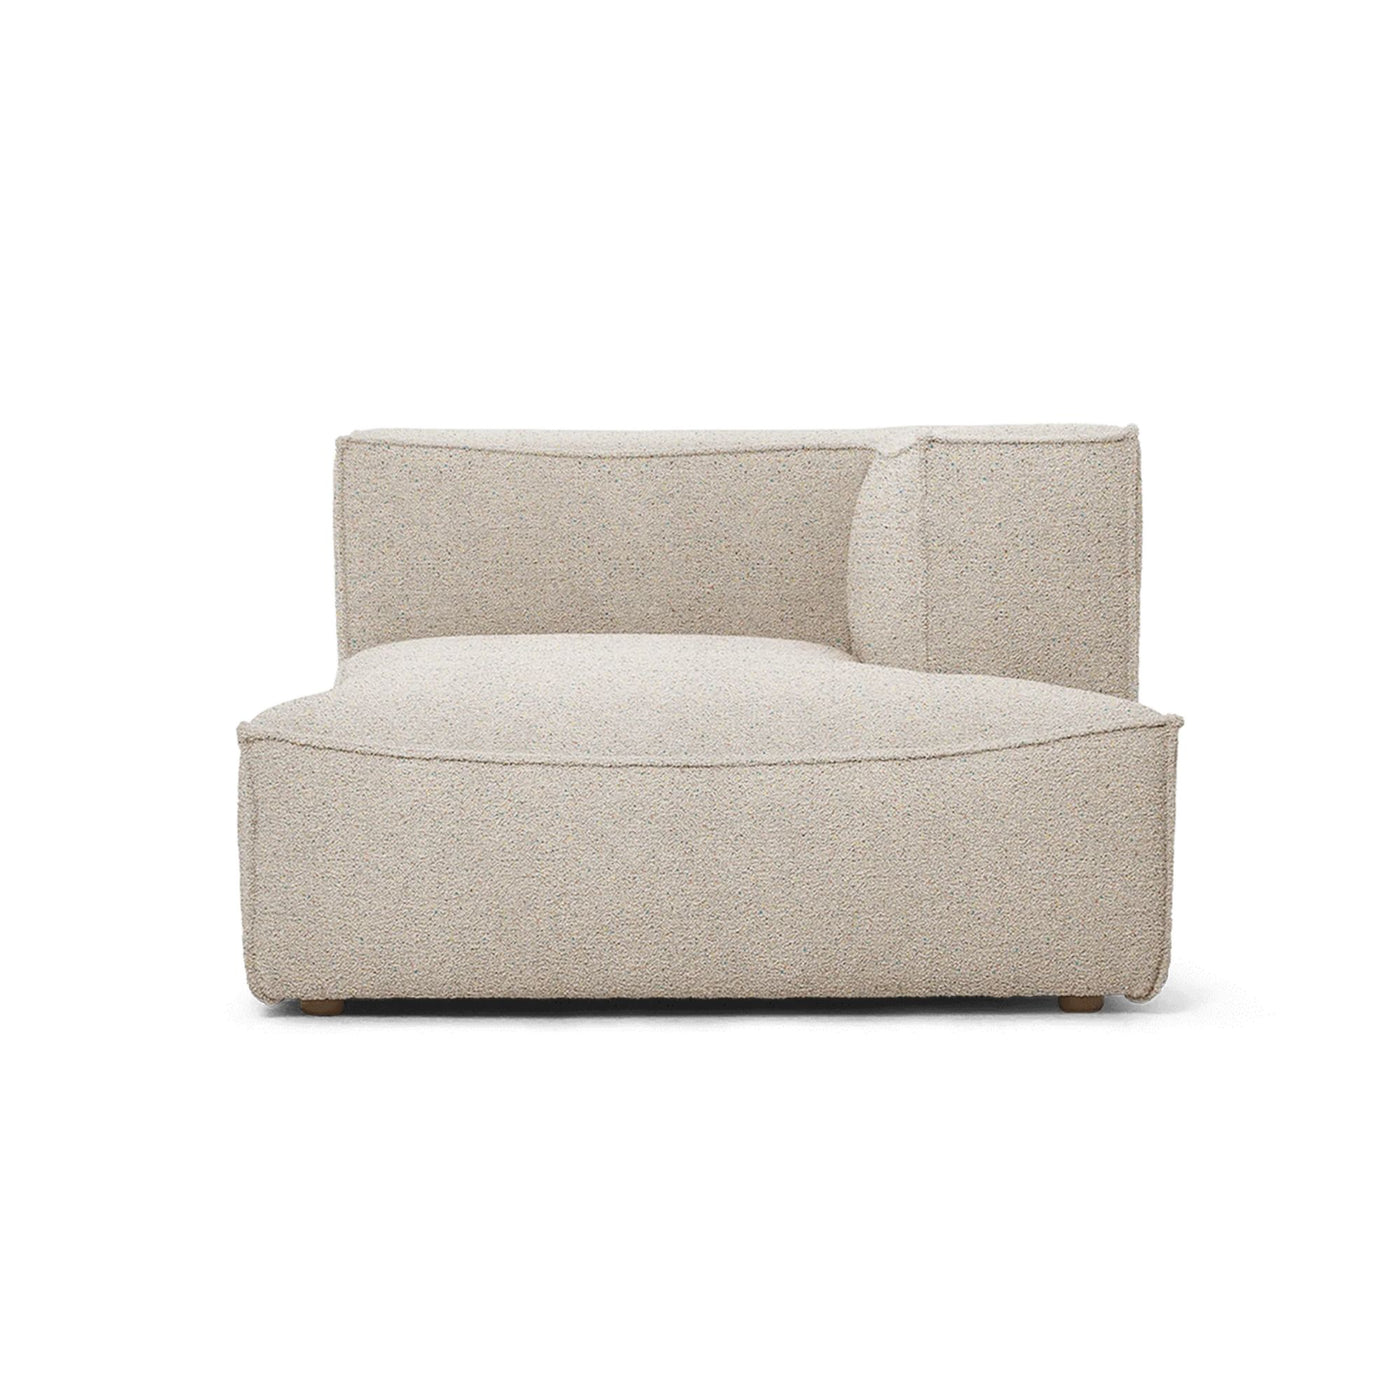 Ferm Living Catena Modular Series. Shop online at someday designs. L601 module in #colour_natural-wool-boucle